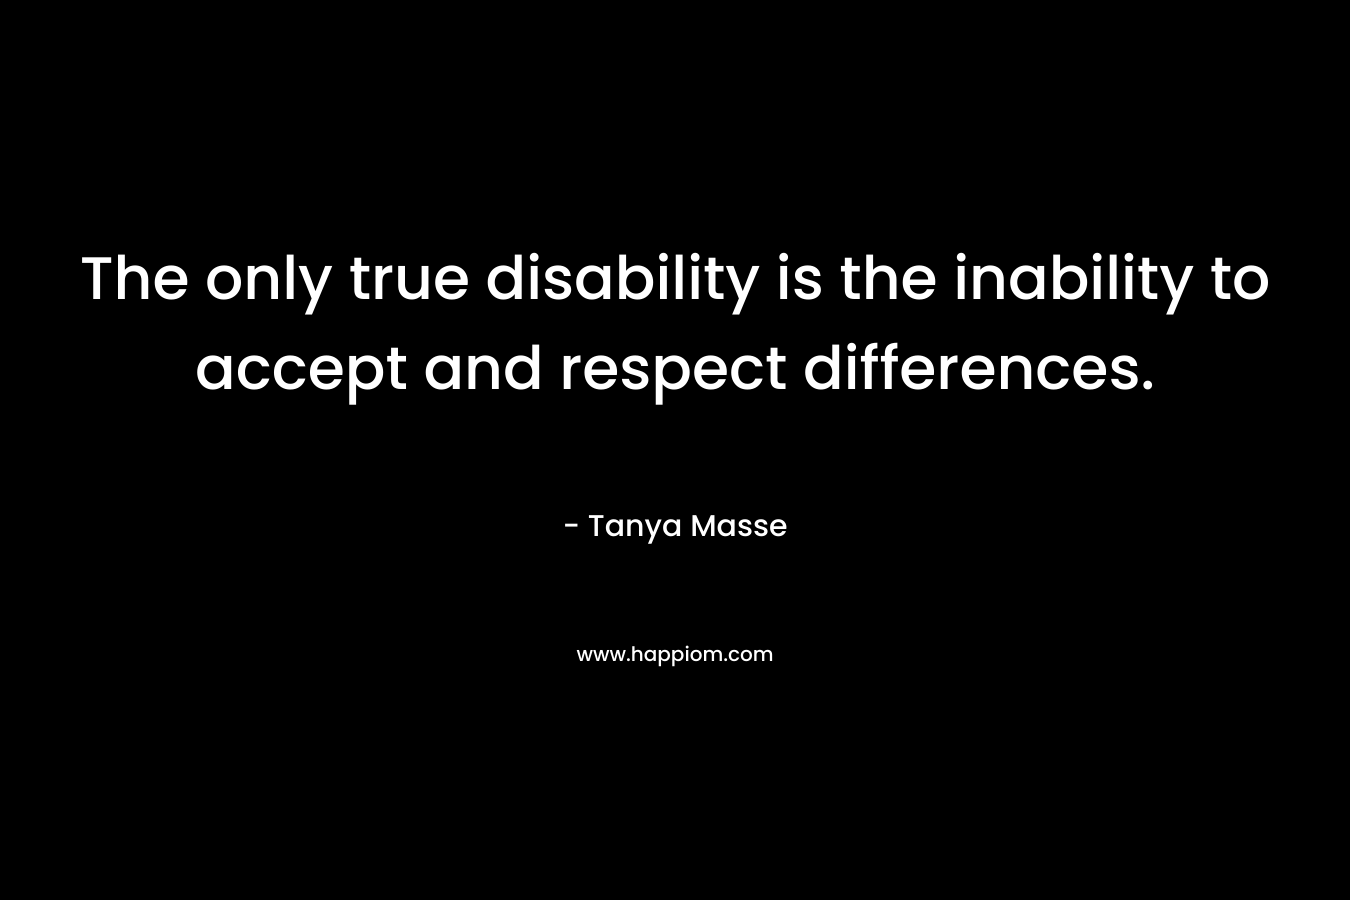 The only true disability is the inability to accept and respect differences. – Tanya Masse